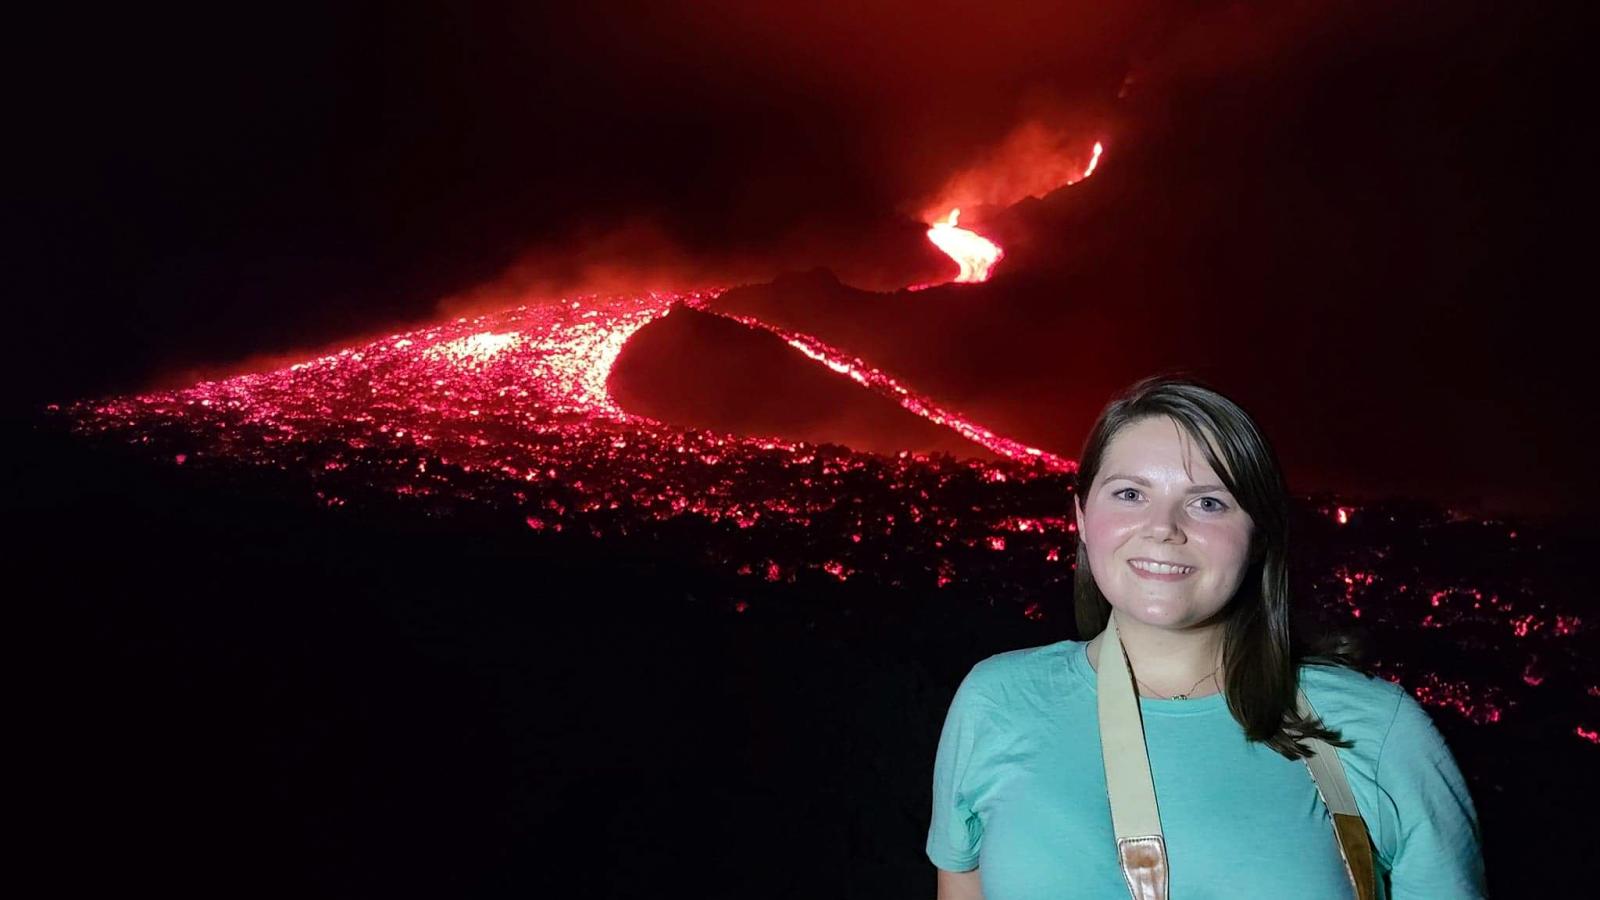 Lindsey on Pacaya Volcano, Guatemala, at night time with an iridescent river of lava